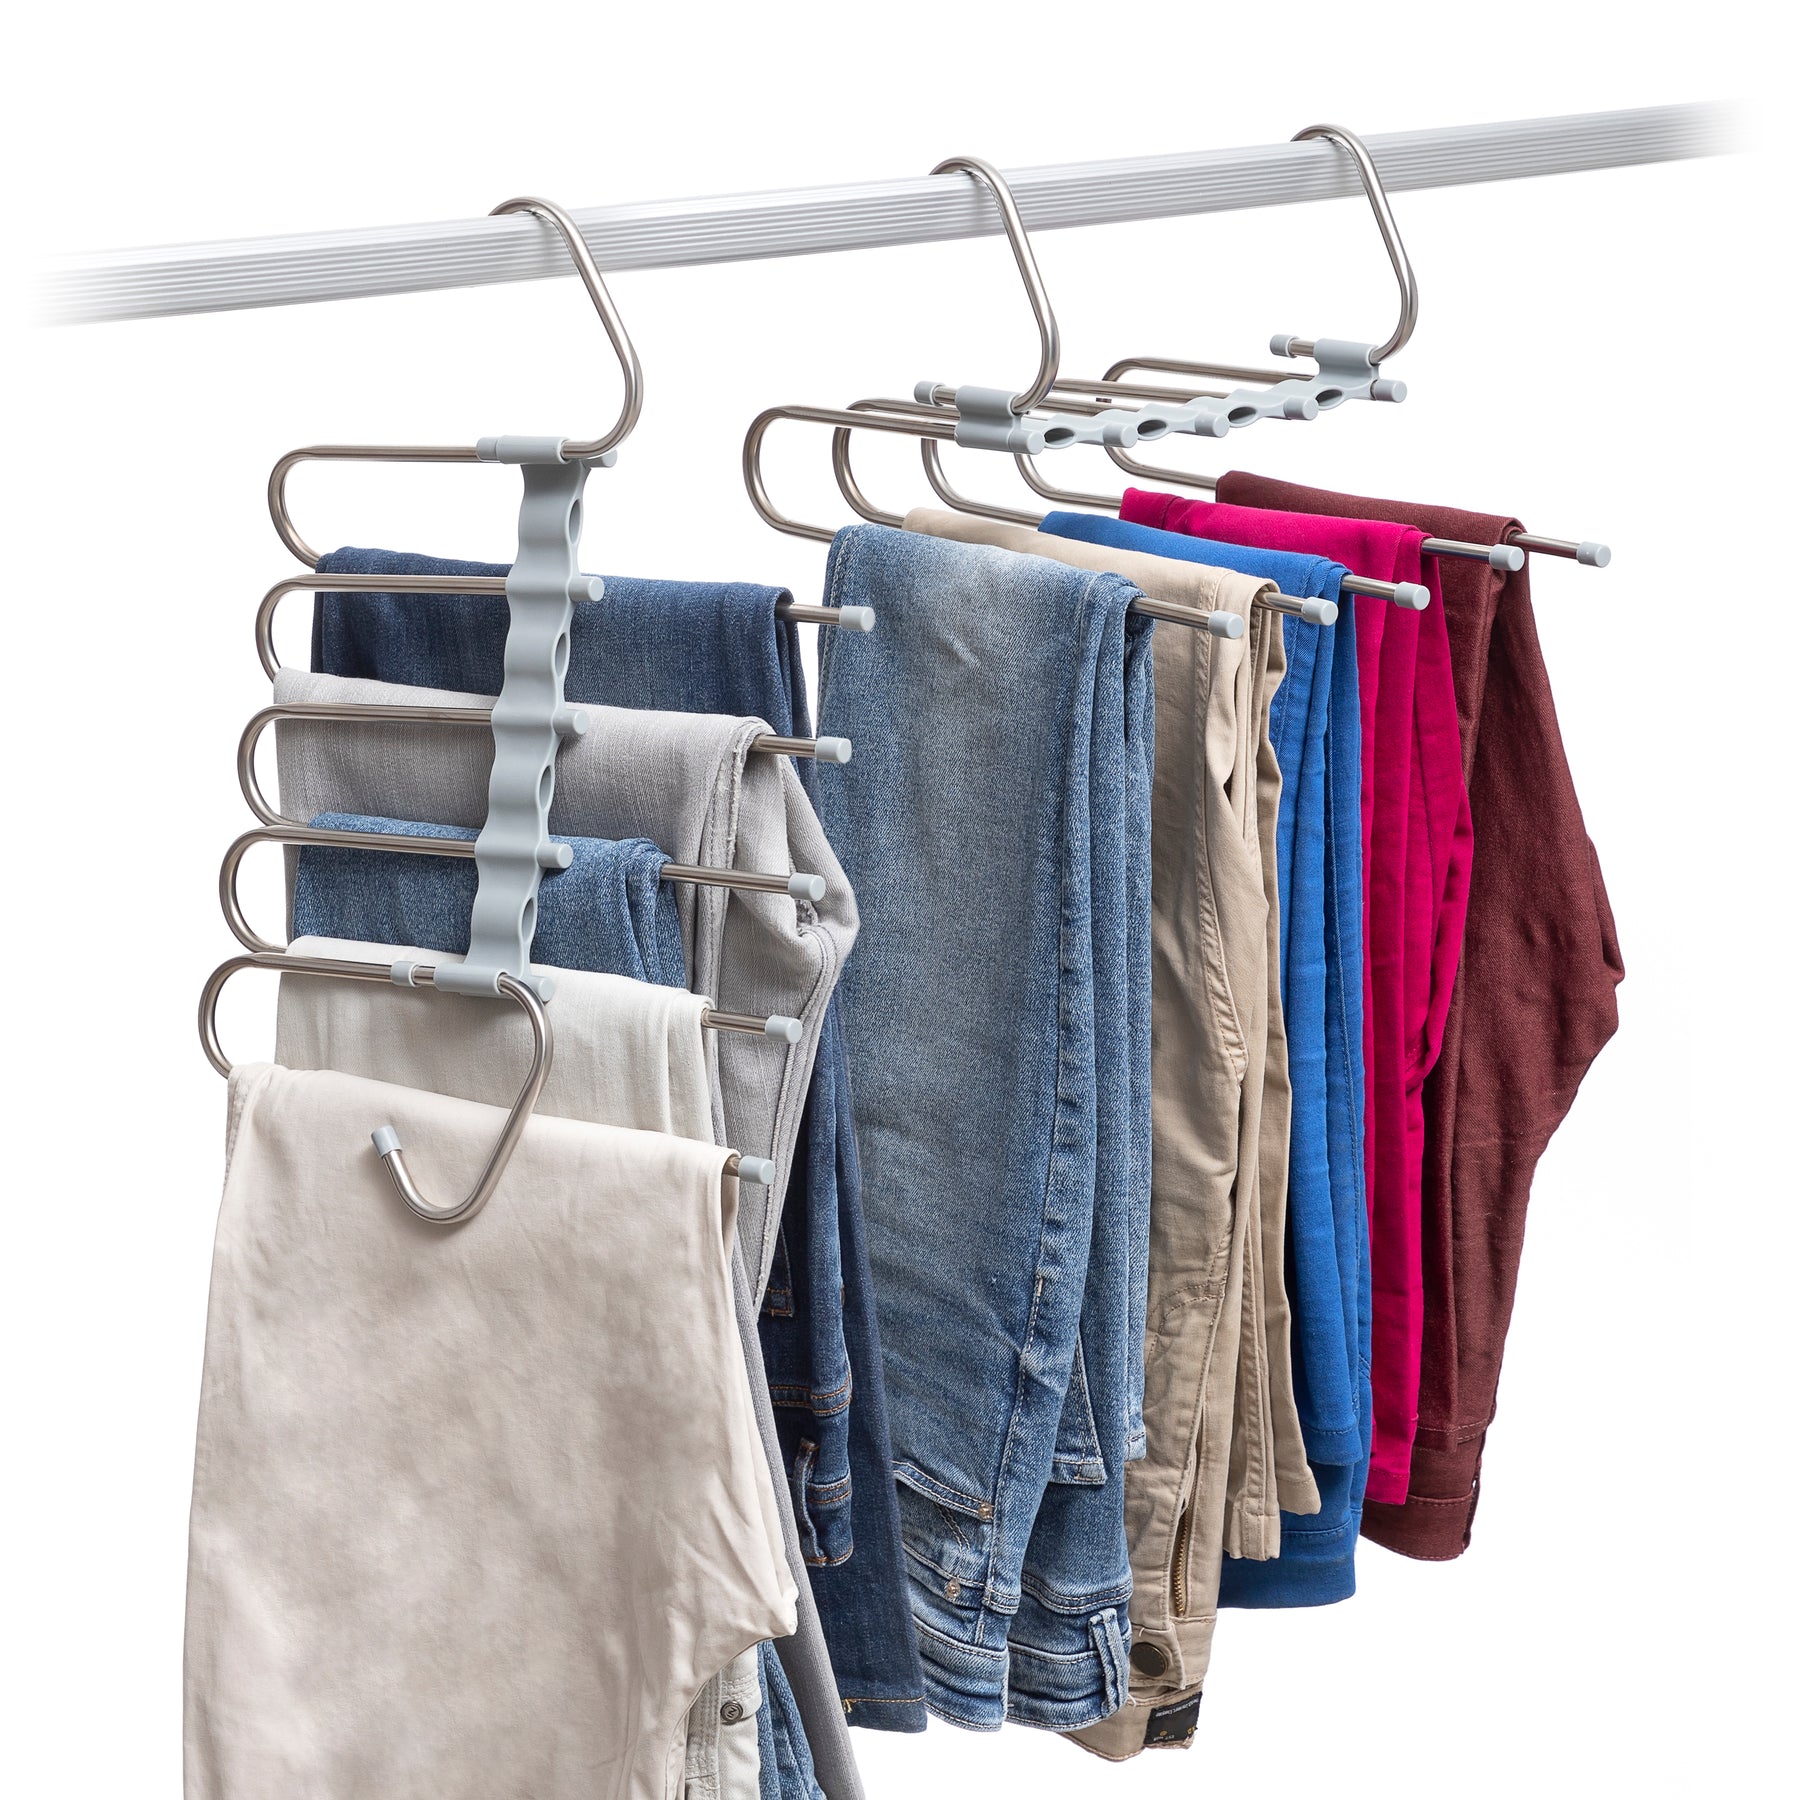 Amazon.com: 3 Quality Multi Pants Hangers, Space-Saving Multi-Bar Metal Pants  Hangers, Stable with Non-Slip Foam Padding, Swivel Hook for 5 Jeans Each,  Suit Pants, Scarves, Towels, Trousers (Skirt, 3) : Home &